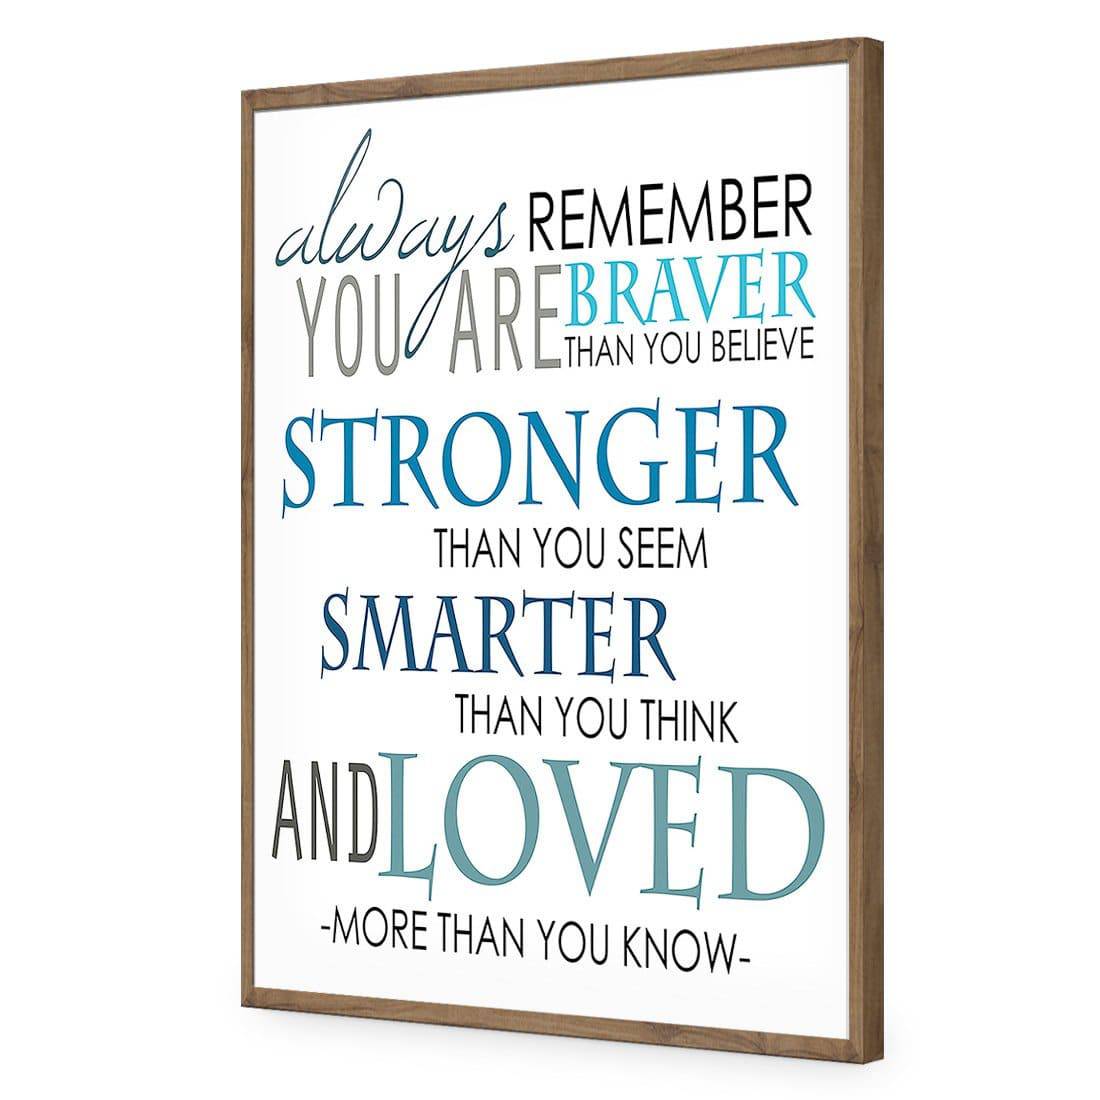 Always Remember-Acrylic-Wall Art Design-Without Border-Acrylic - Natural Frame-45x30cm-Wall Art Designs